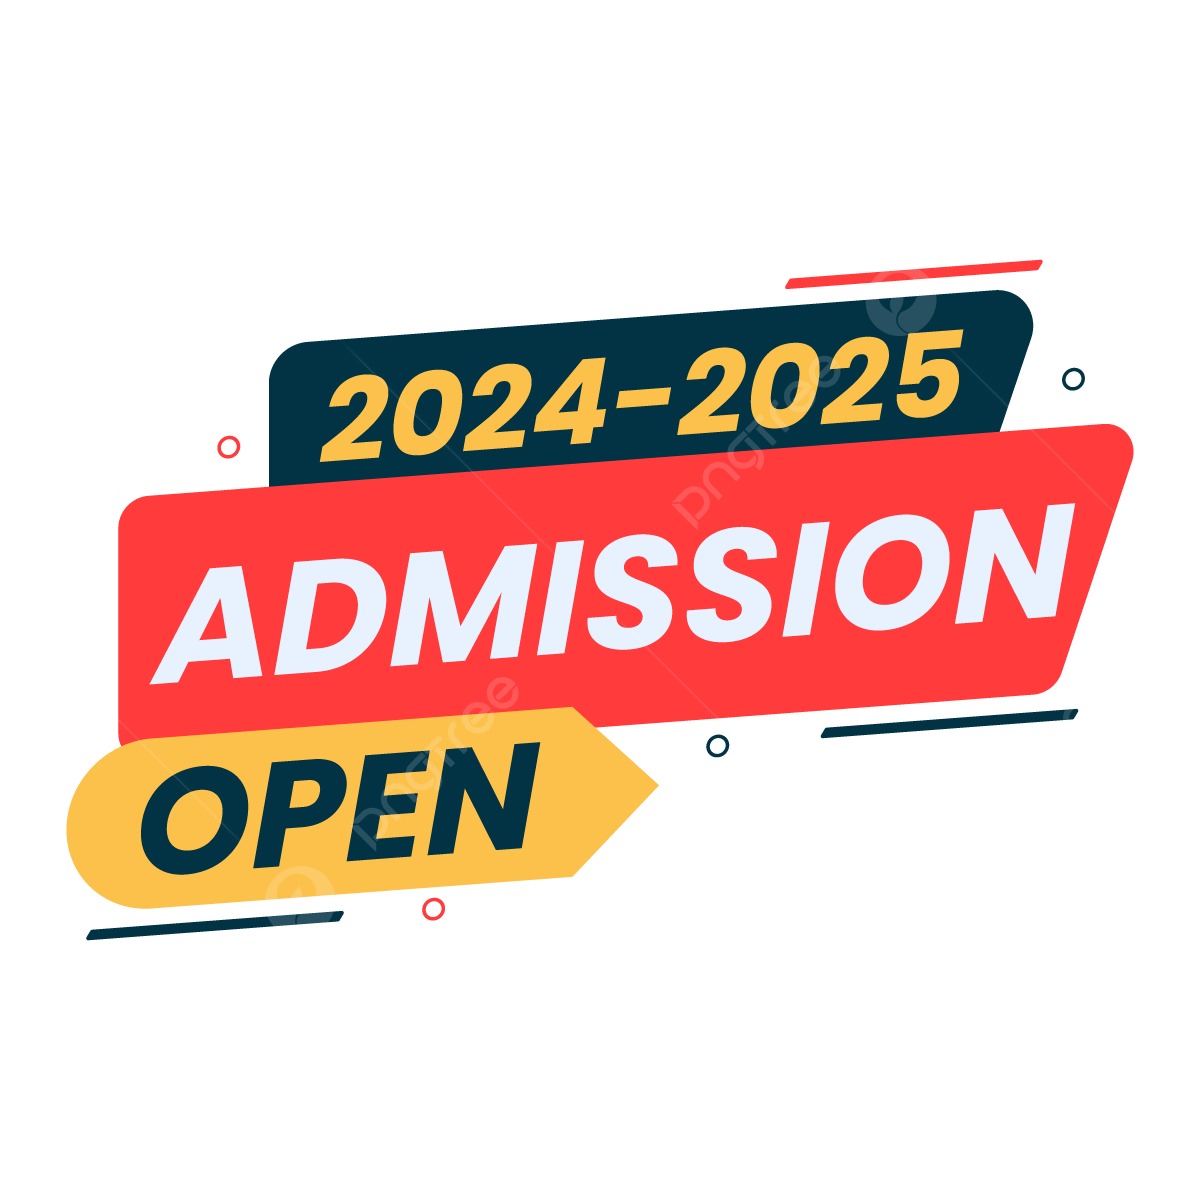 NEW ADMISSION for the year 2024